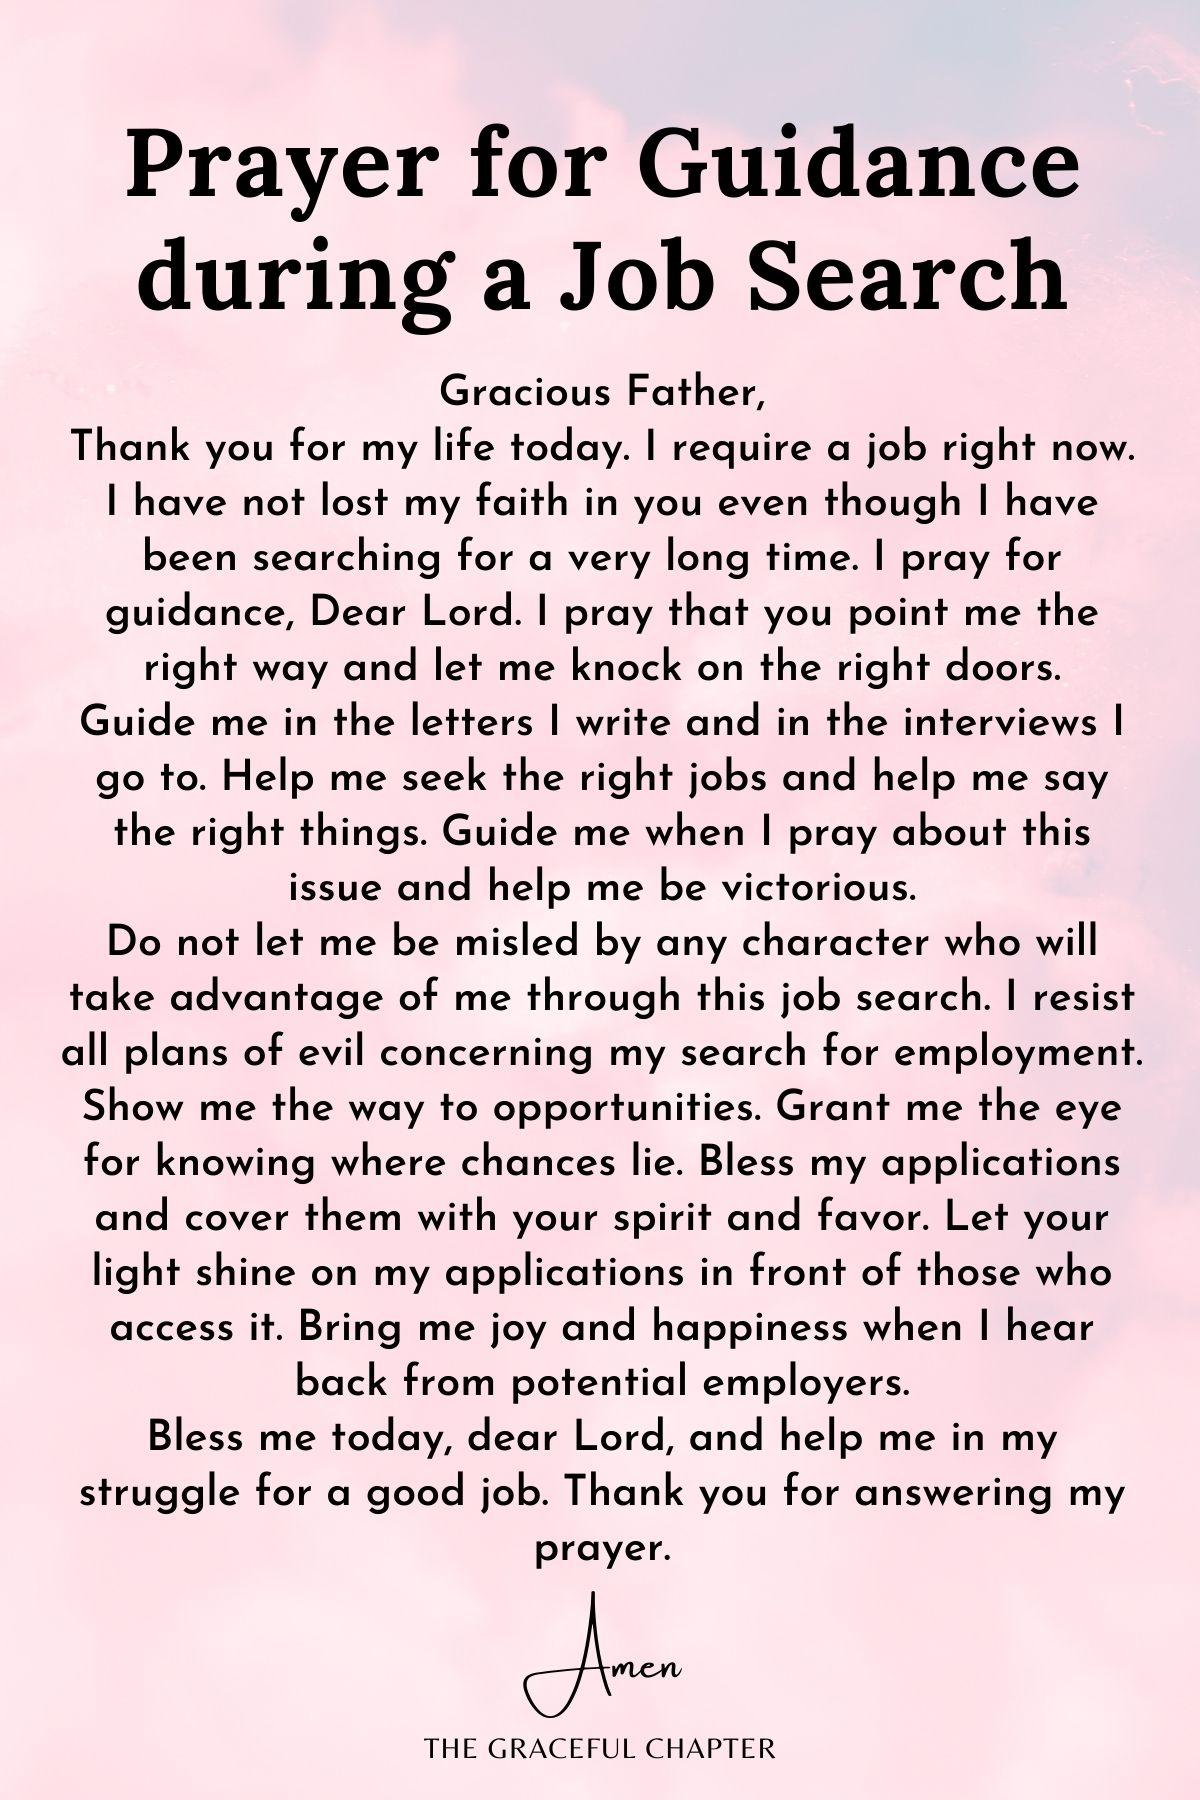 Prayer for Guidance During a Job Search